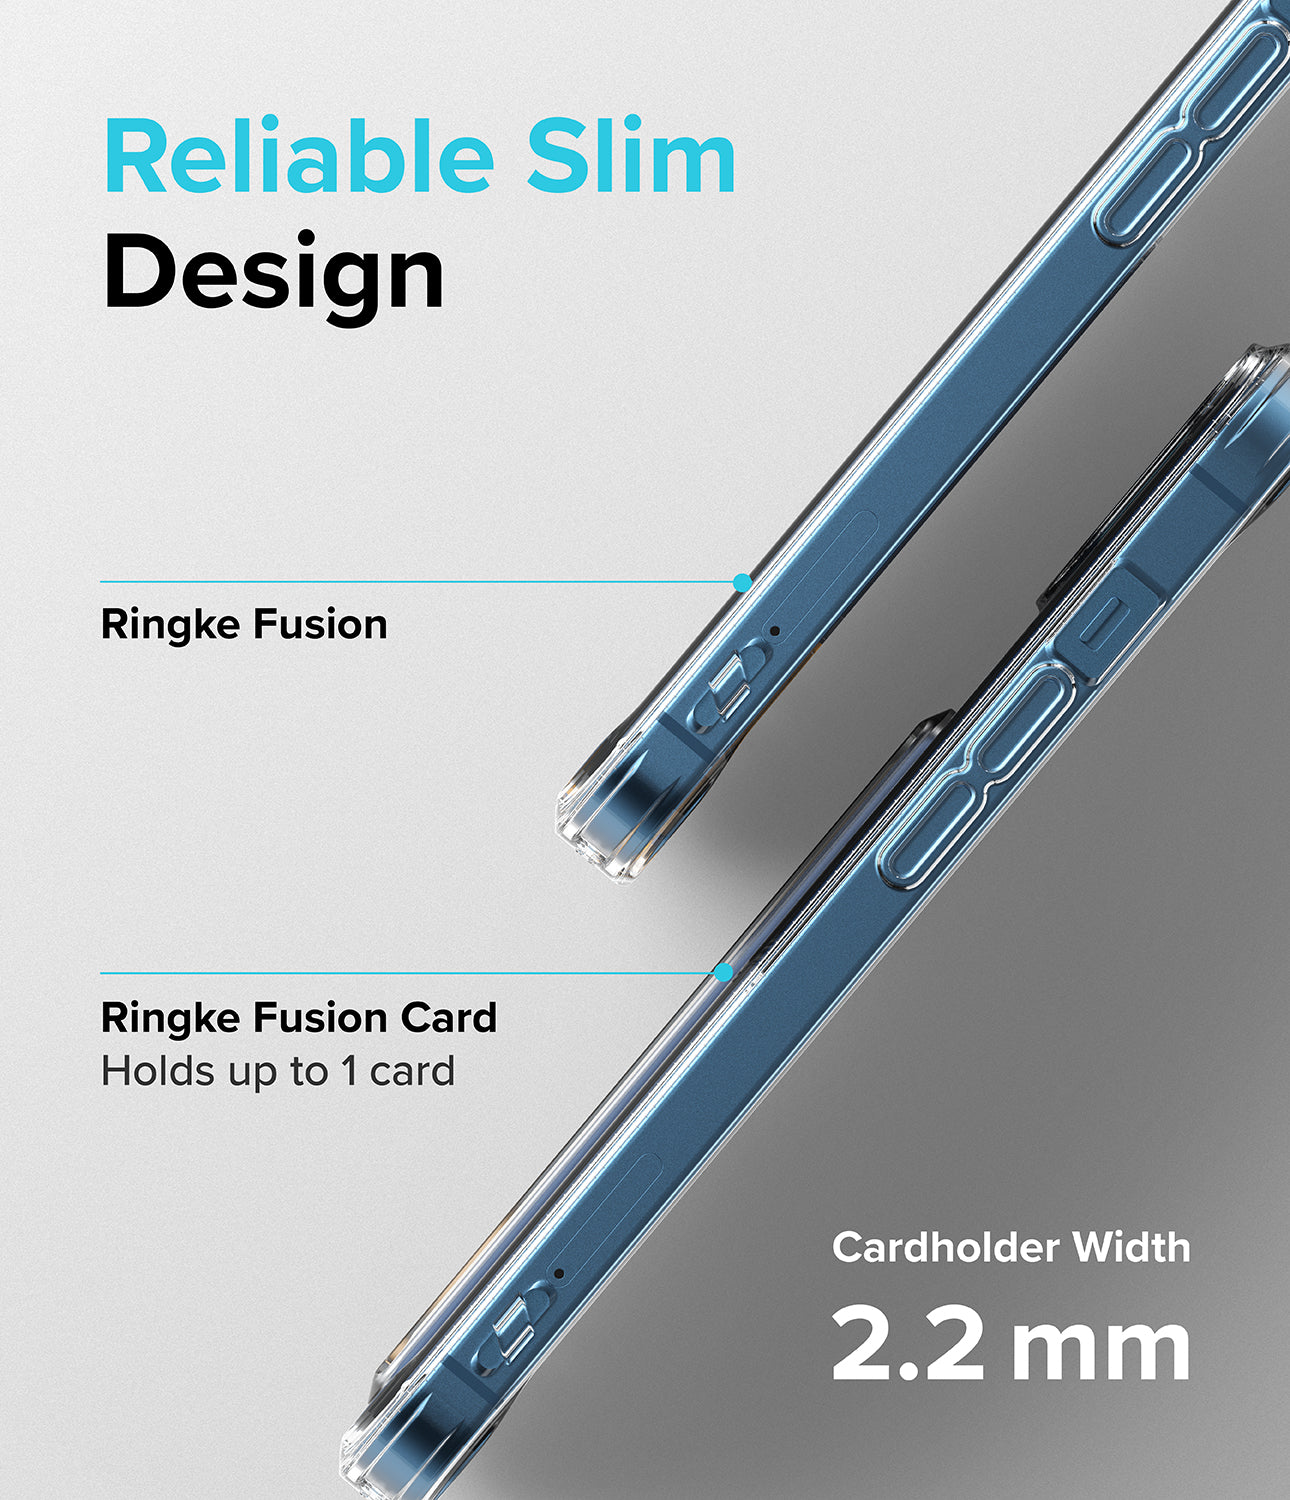 iPhone 13 Case | Fusion Card Clear - Reliable Slim Design. Ringke Fusion Card holds up to 1 card.